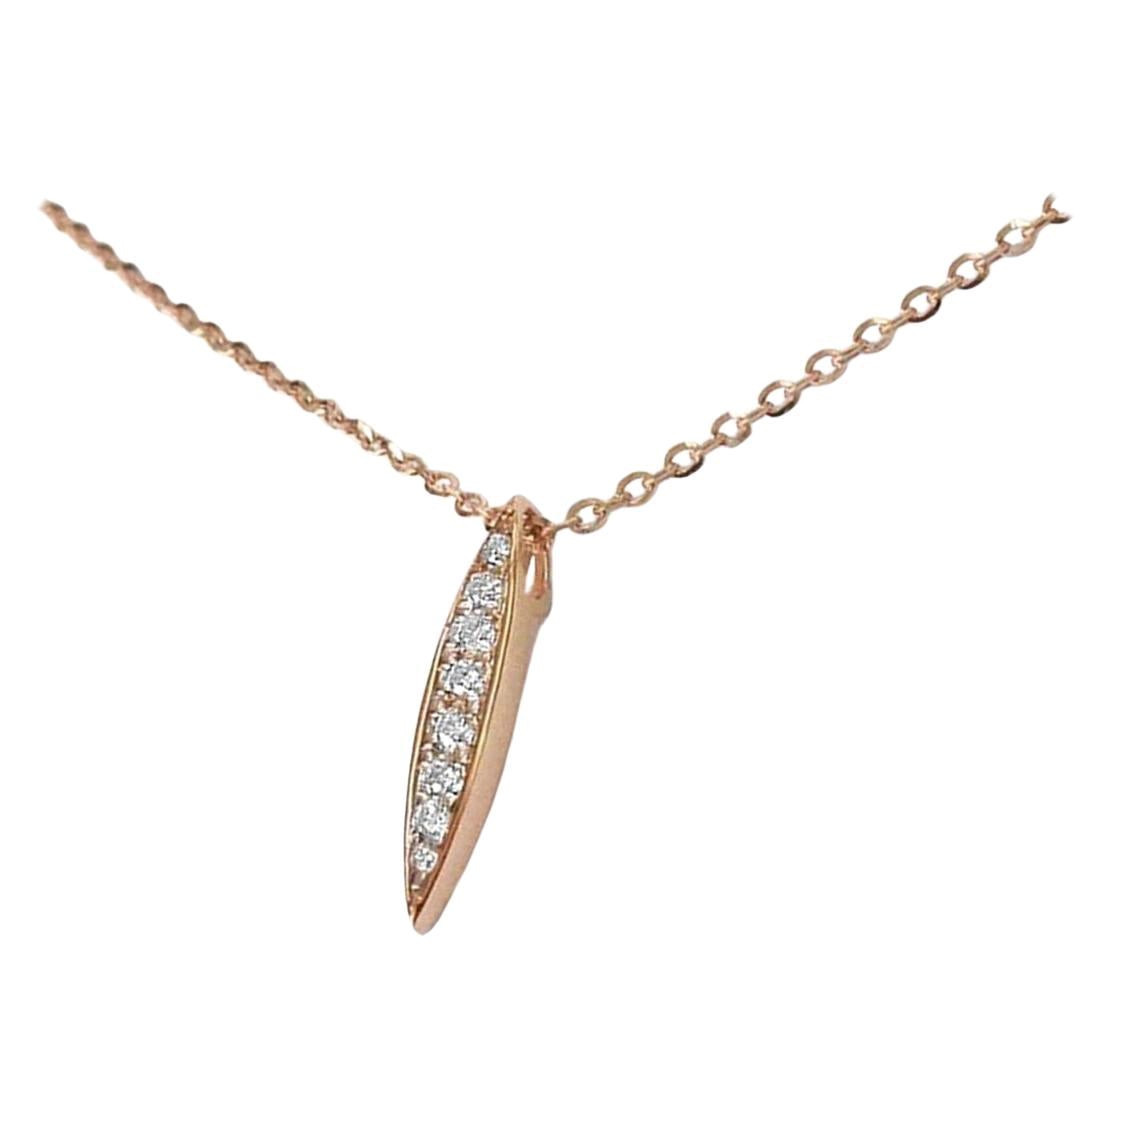 Pave Diamond Necklace is made of 14k solid gold available in three colors of gold, Rose Gold / White Gold / Yellow Gold.

Natural genuine round cut diamond each diamond is hand selected by me to ensure quality and set by a master setter in our